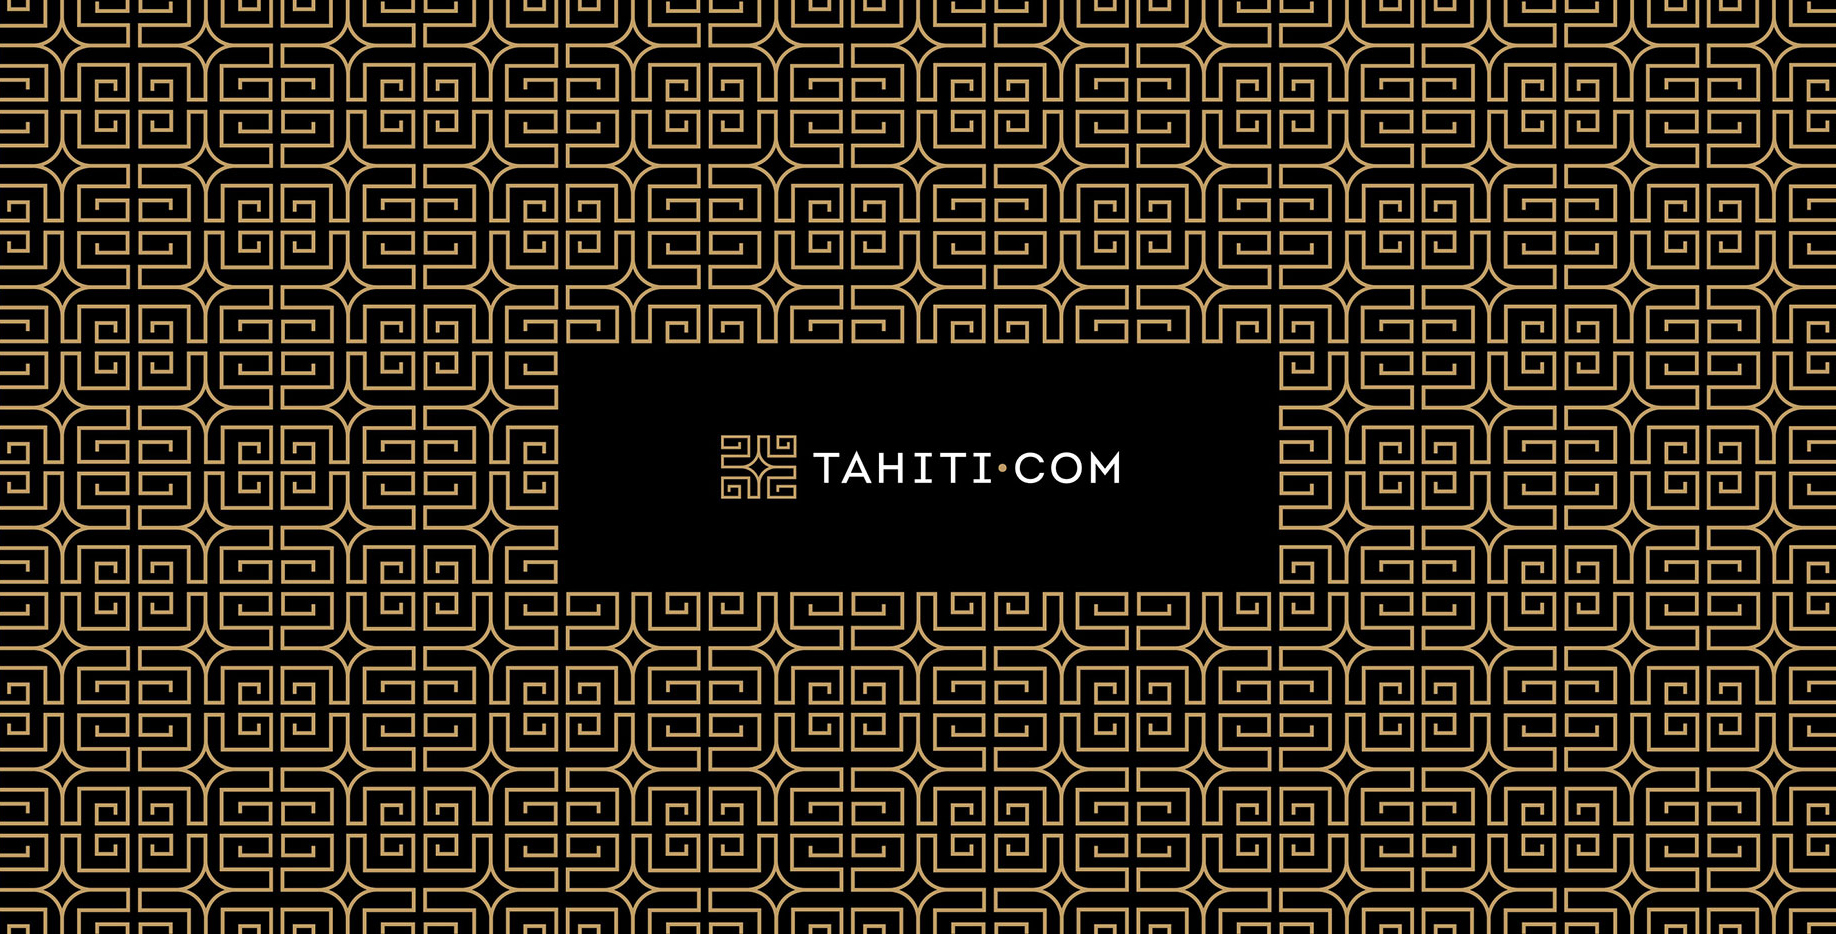 gold pattern made out of the tahiti.com symbol on black with logo in the center